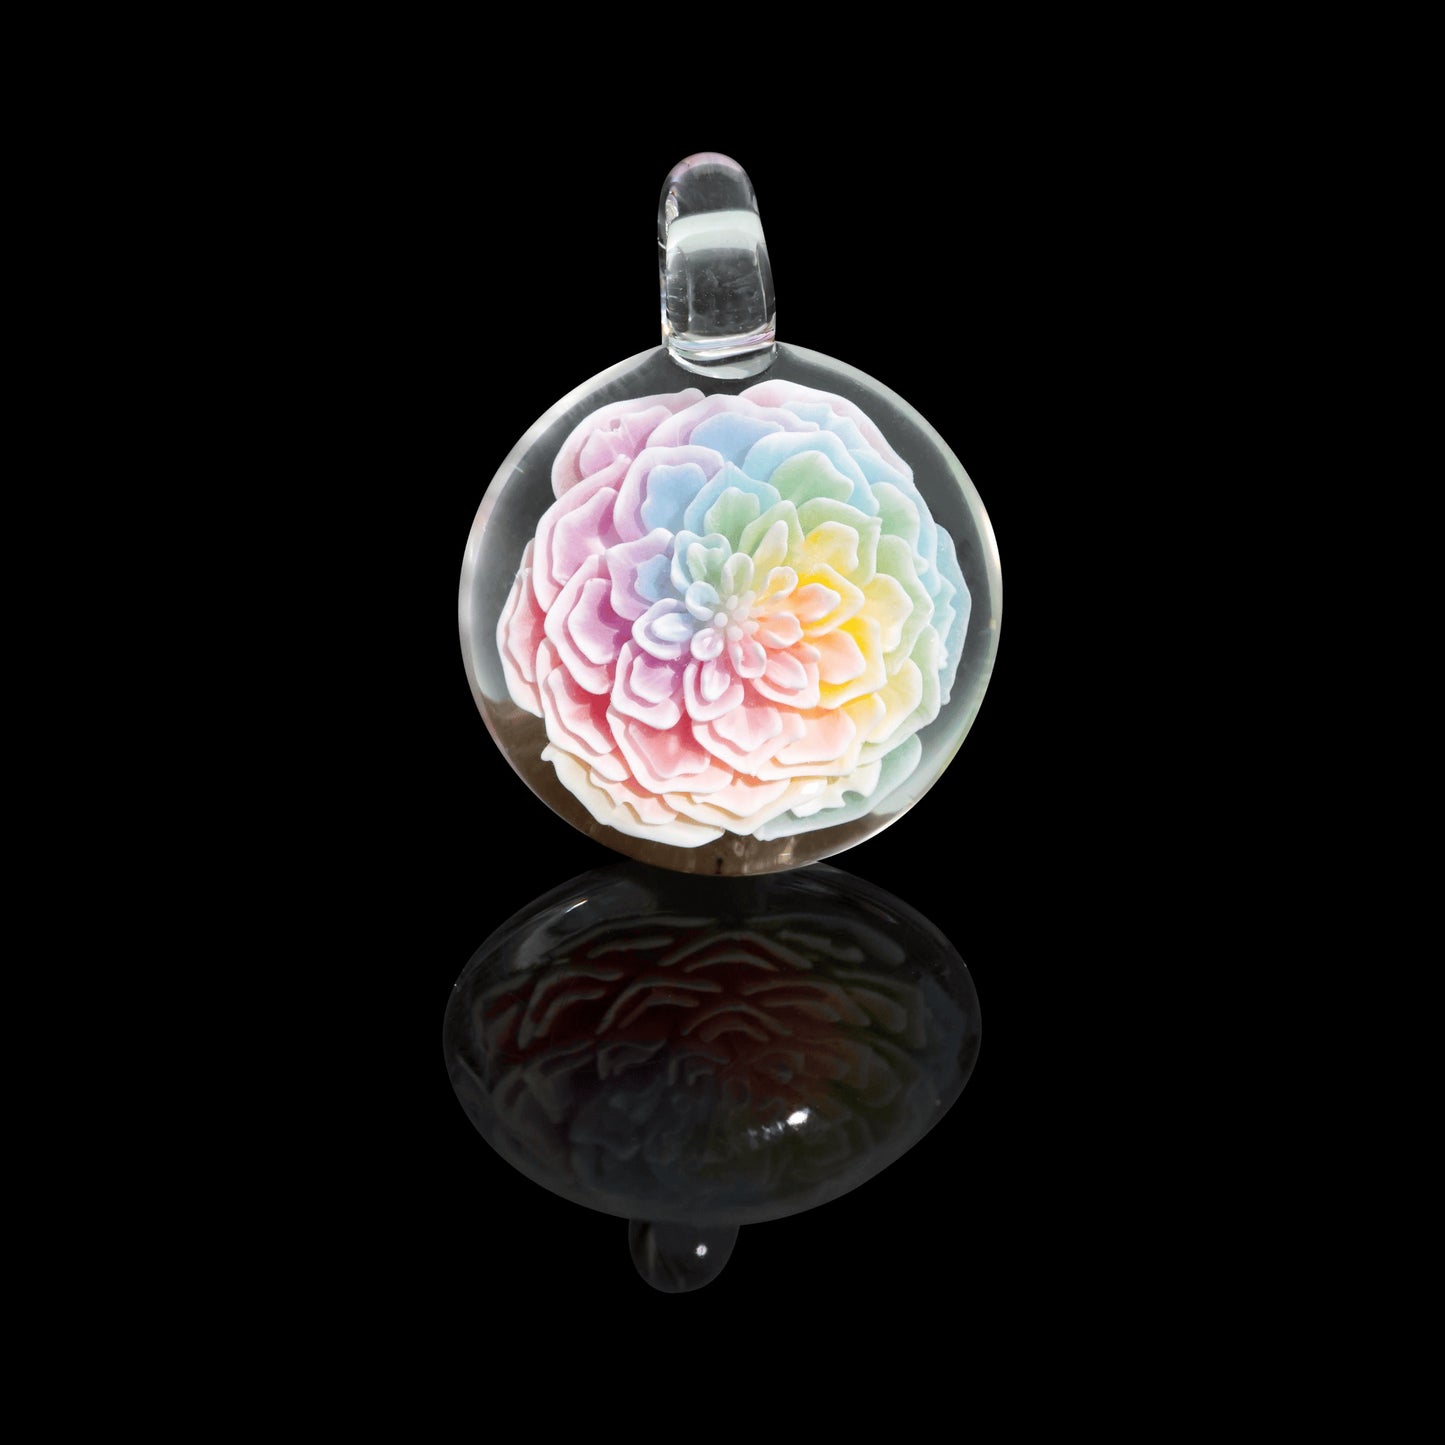 meticulously crafted glass pendant - Glass Pendant (G) by Glass Azu